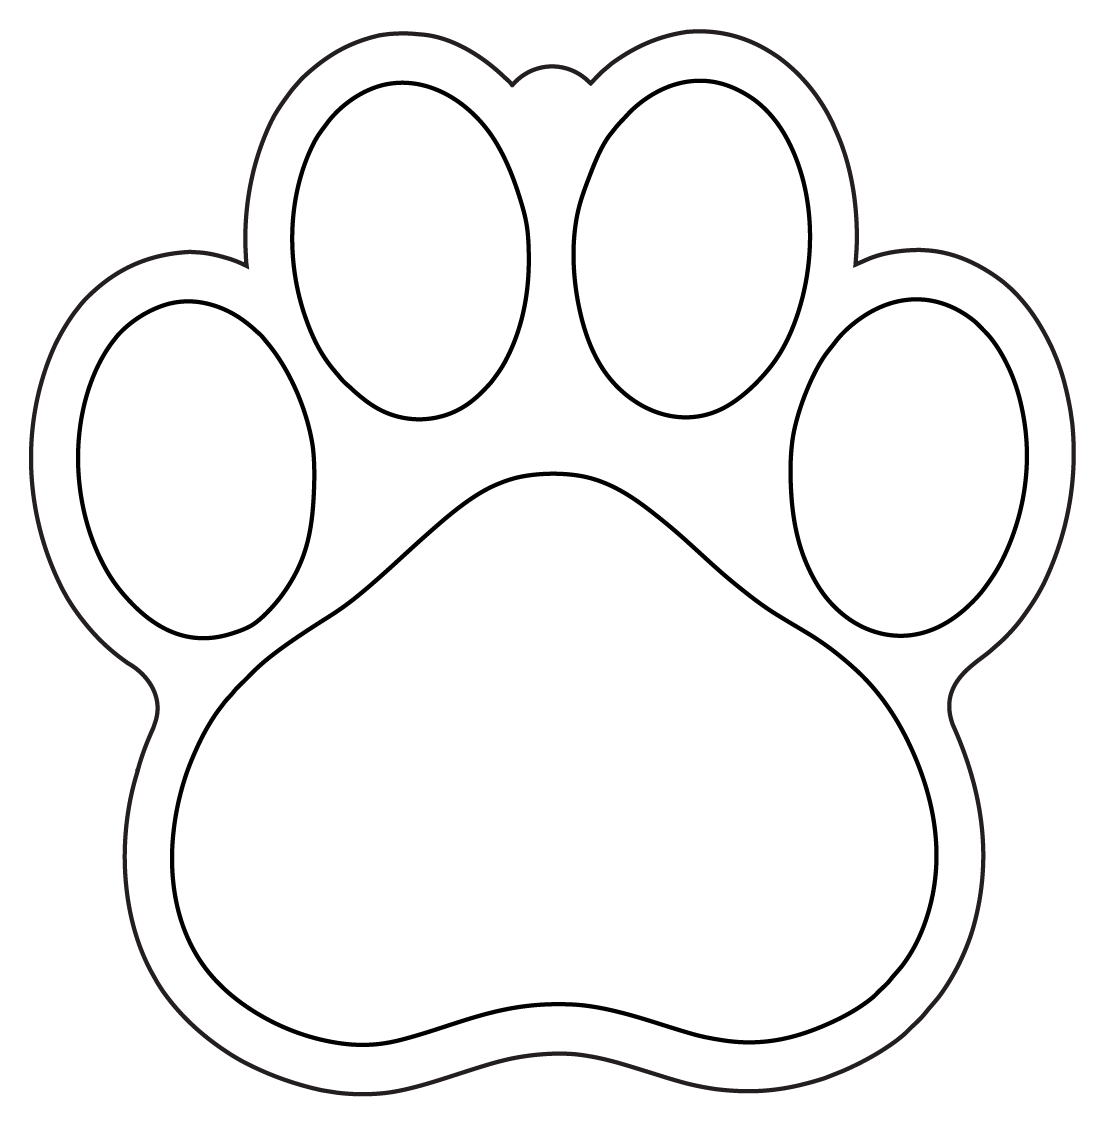 Paw Ornament Template - SVG